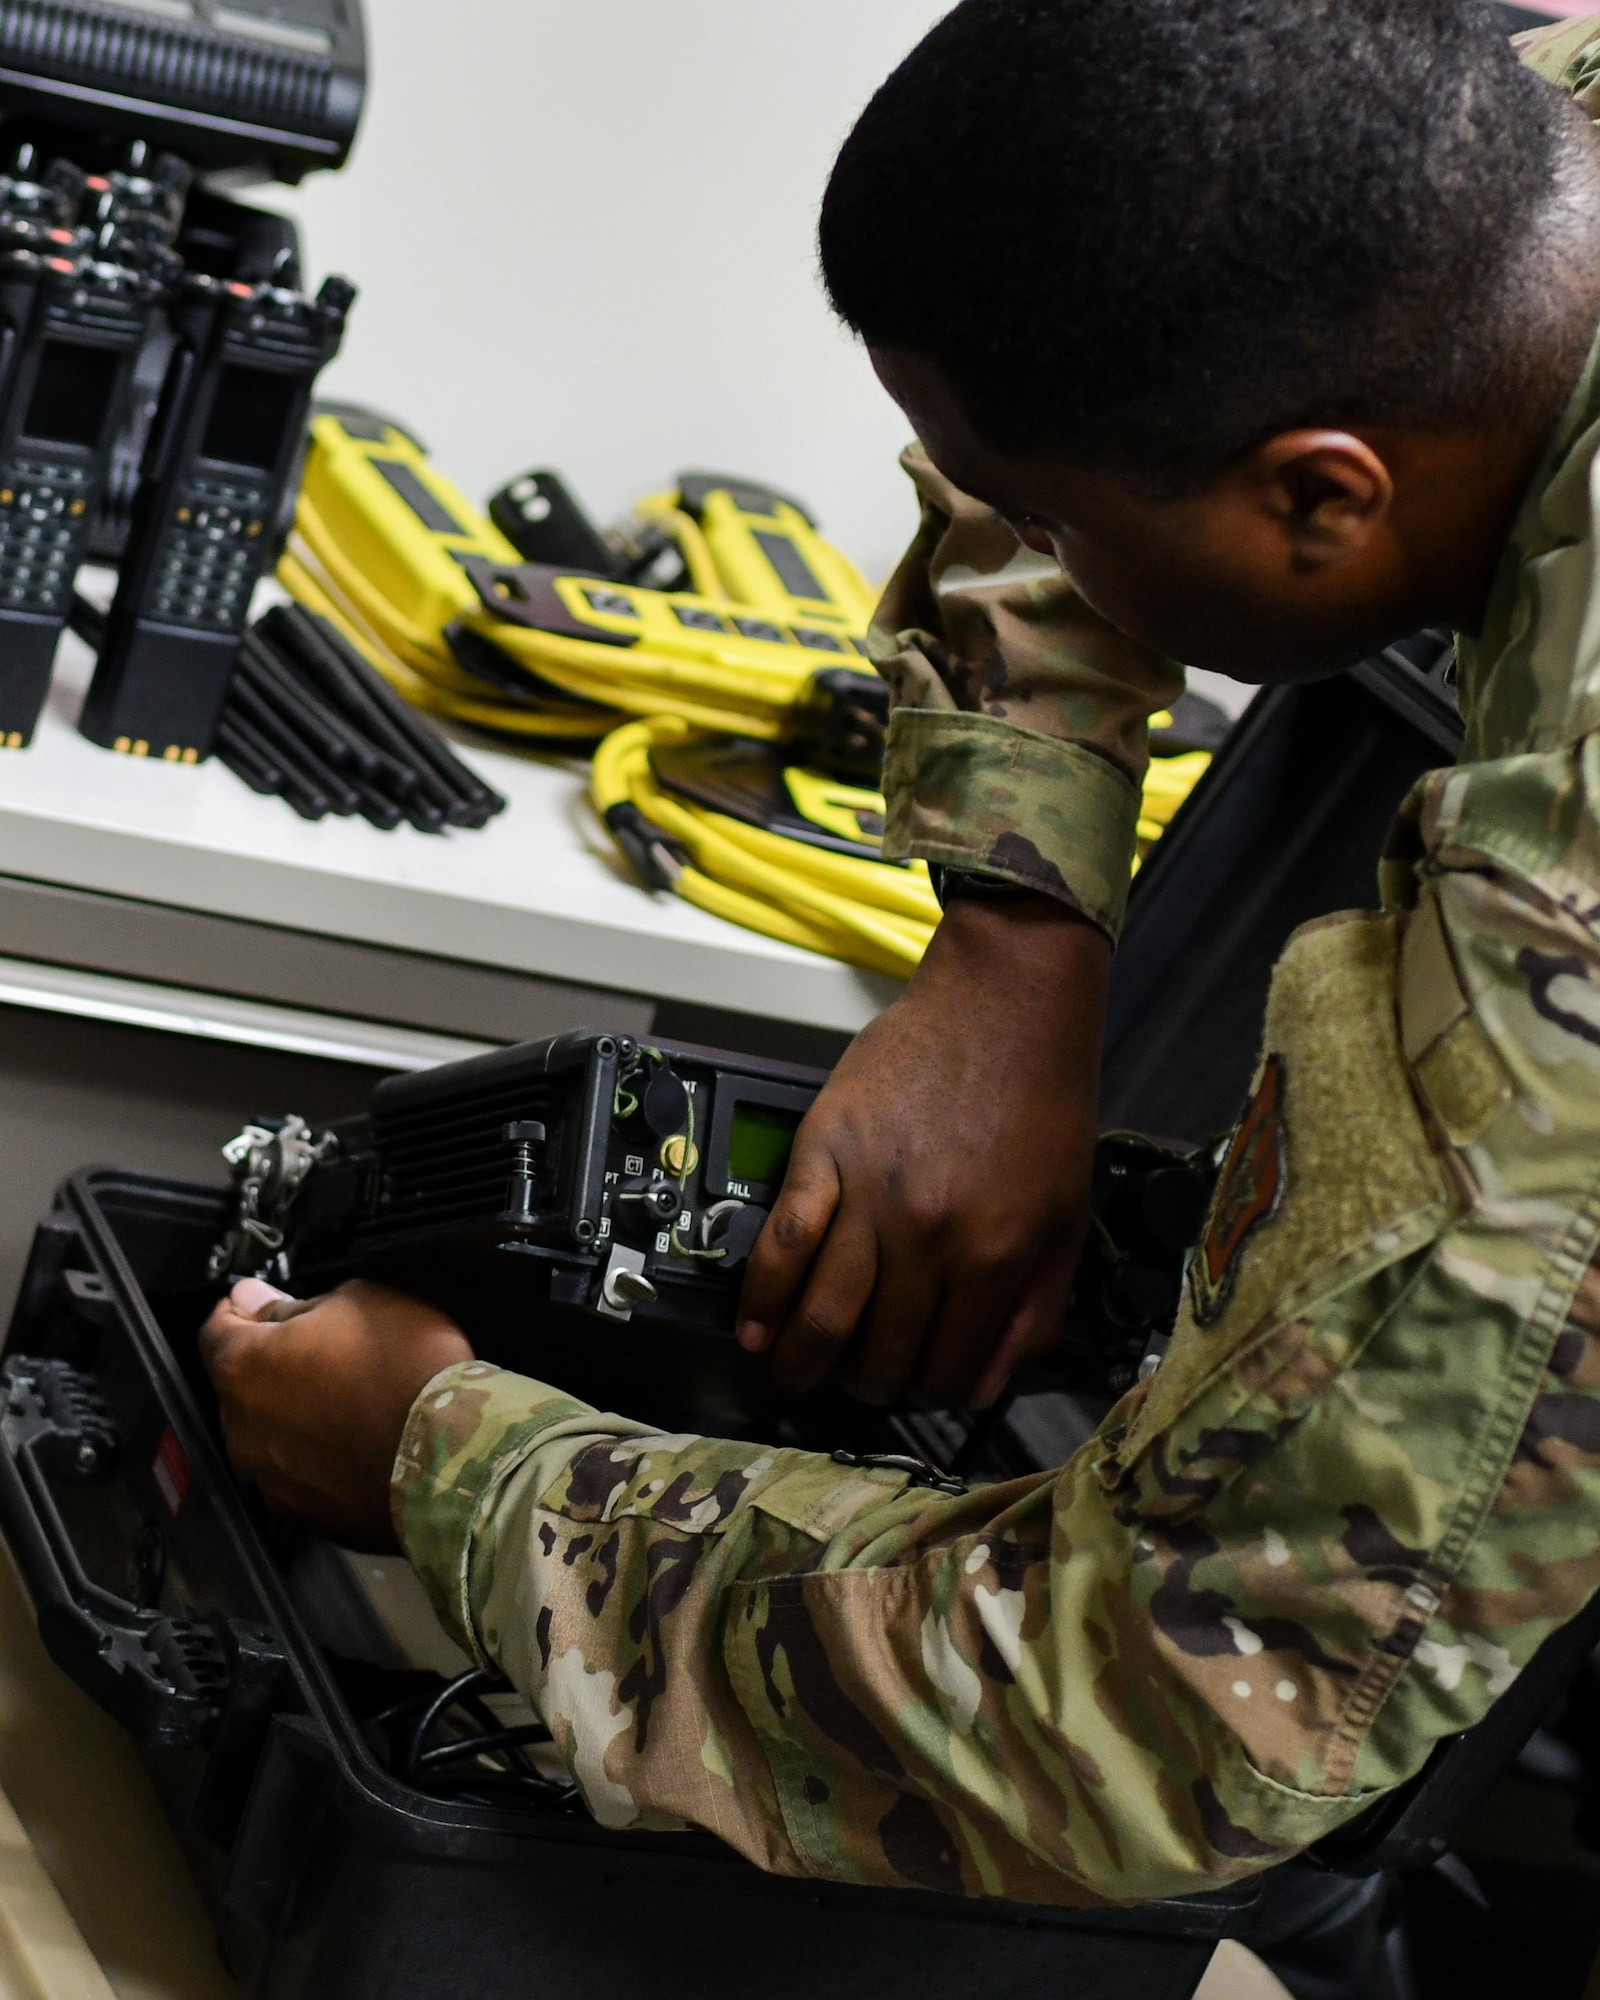 Staff Sgt. Malik Flowers, a radio frequency transmission systems technician assigned to the 910th Communications Squadron, packs radio equipment for an upcoming mission to Jacksonville Florida, Jan. 11, 2019, at Youngstown Air Reserve Station.